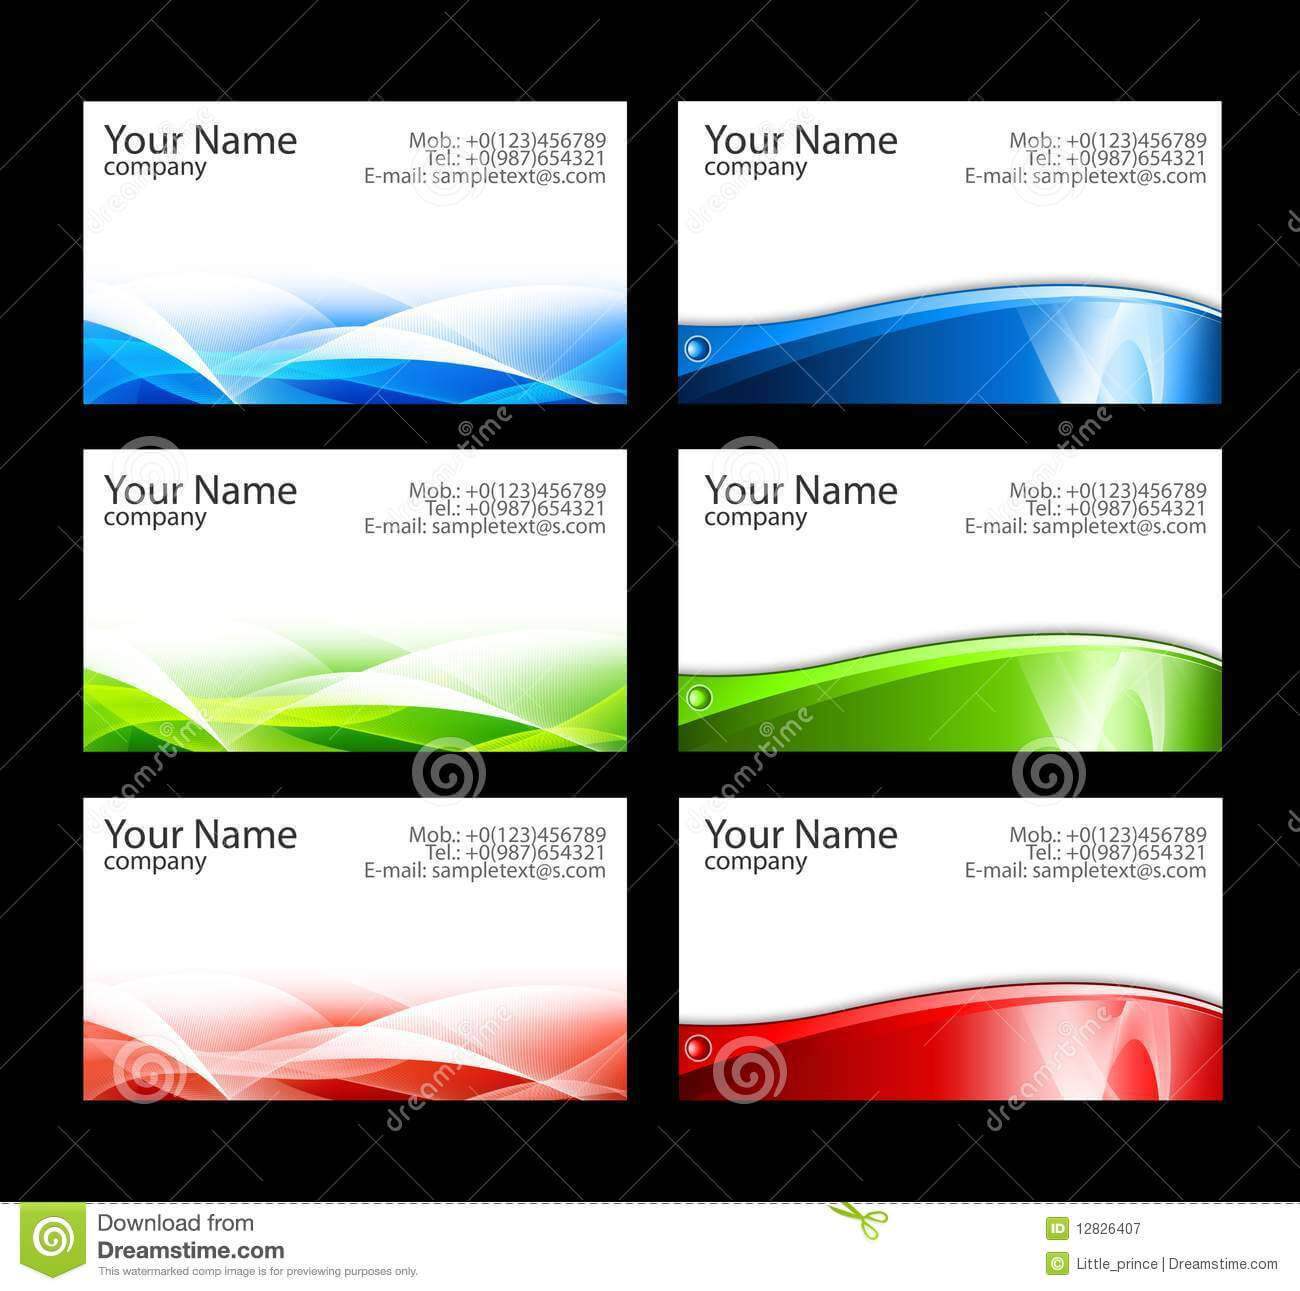 Free Downloadable Business Cards Awesome Freepdfcards Create Inside Calling Card Free Template